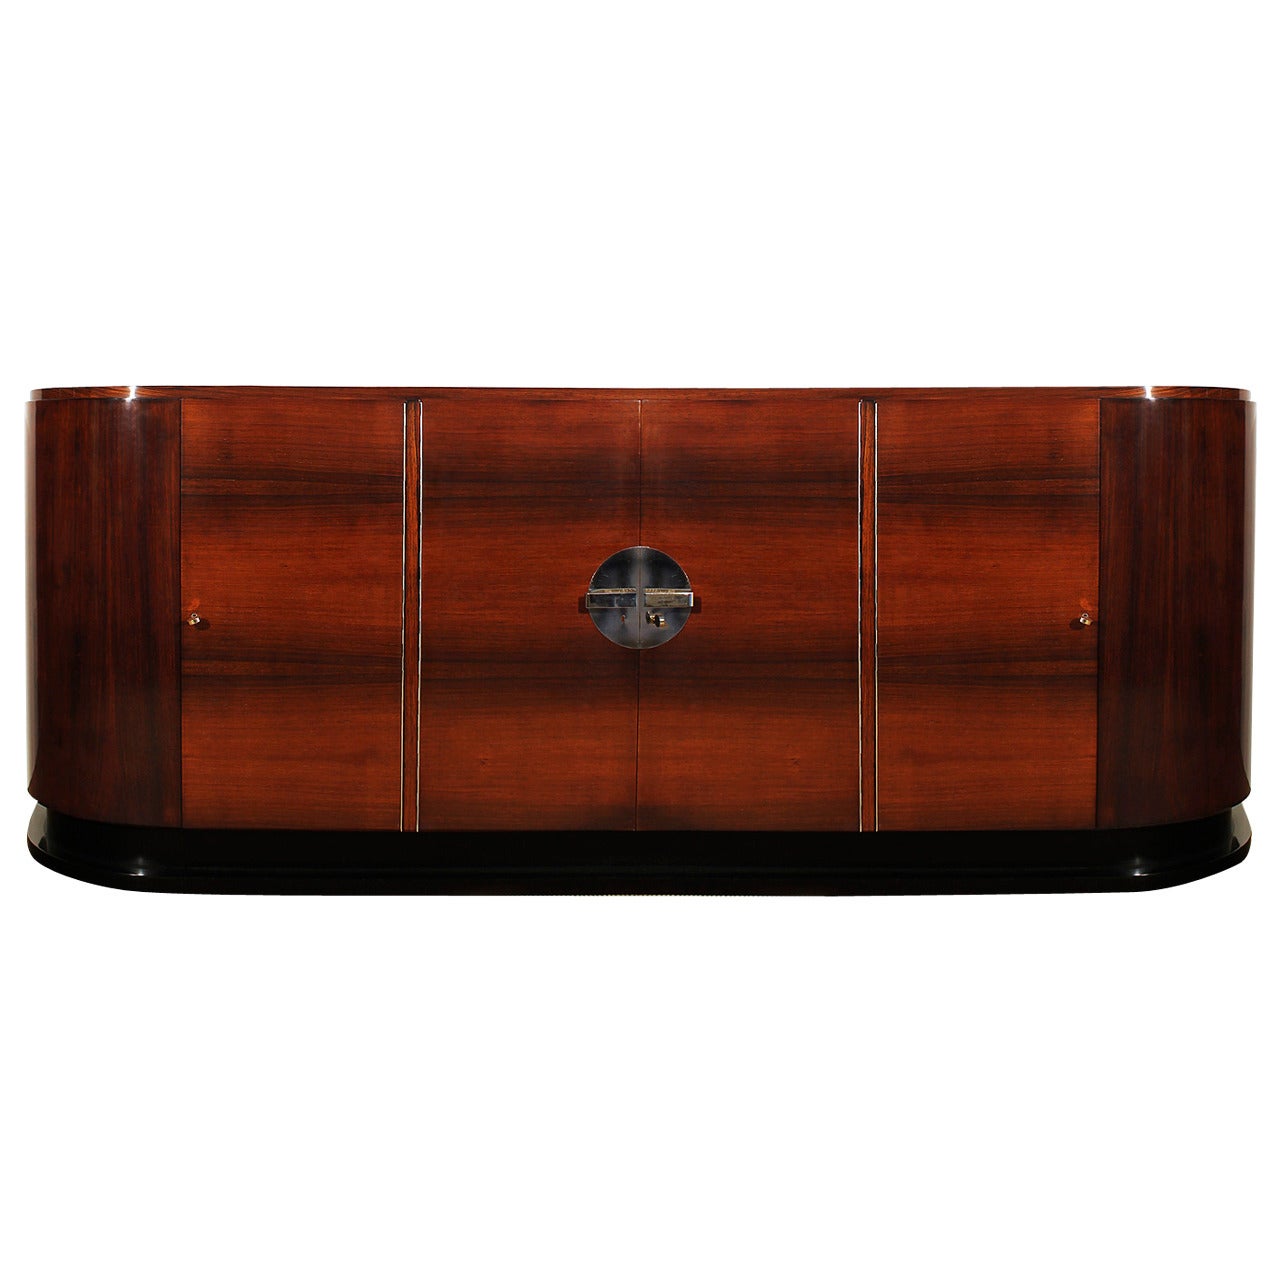 Splendid French Art Deco Rounded Sideboard